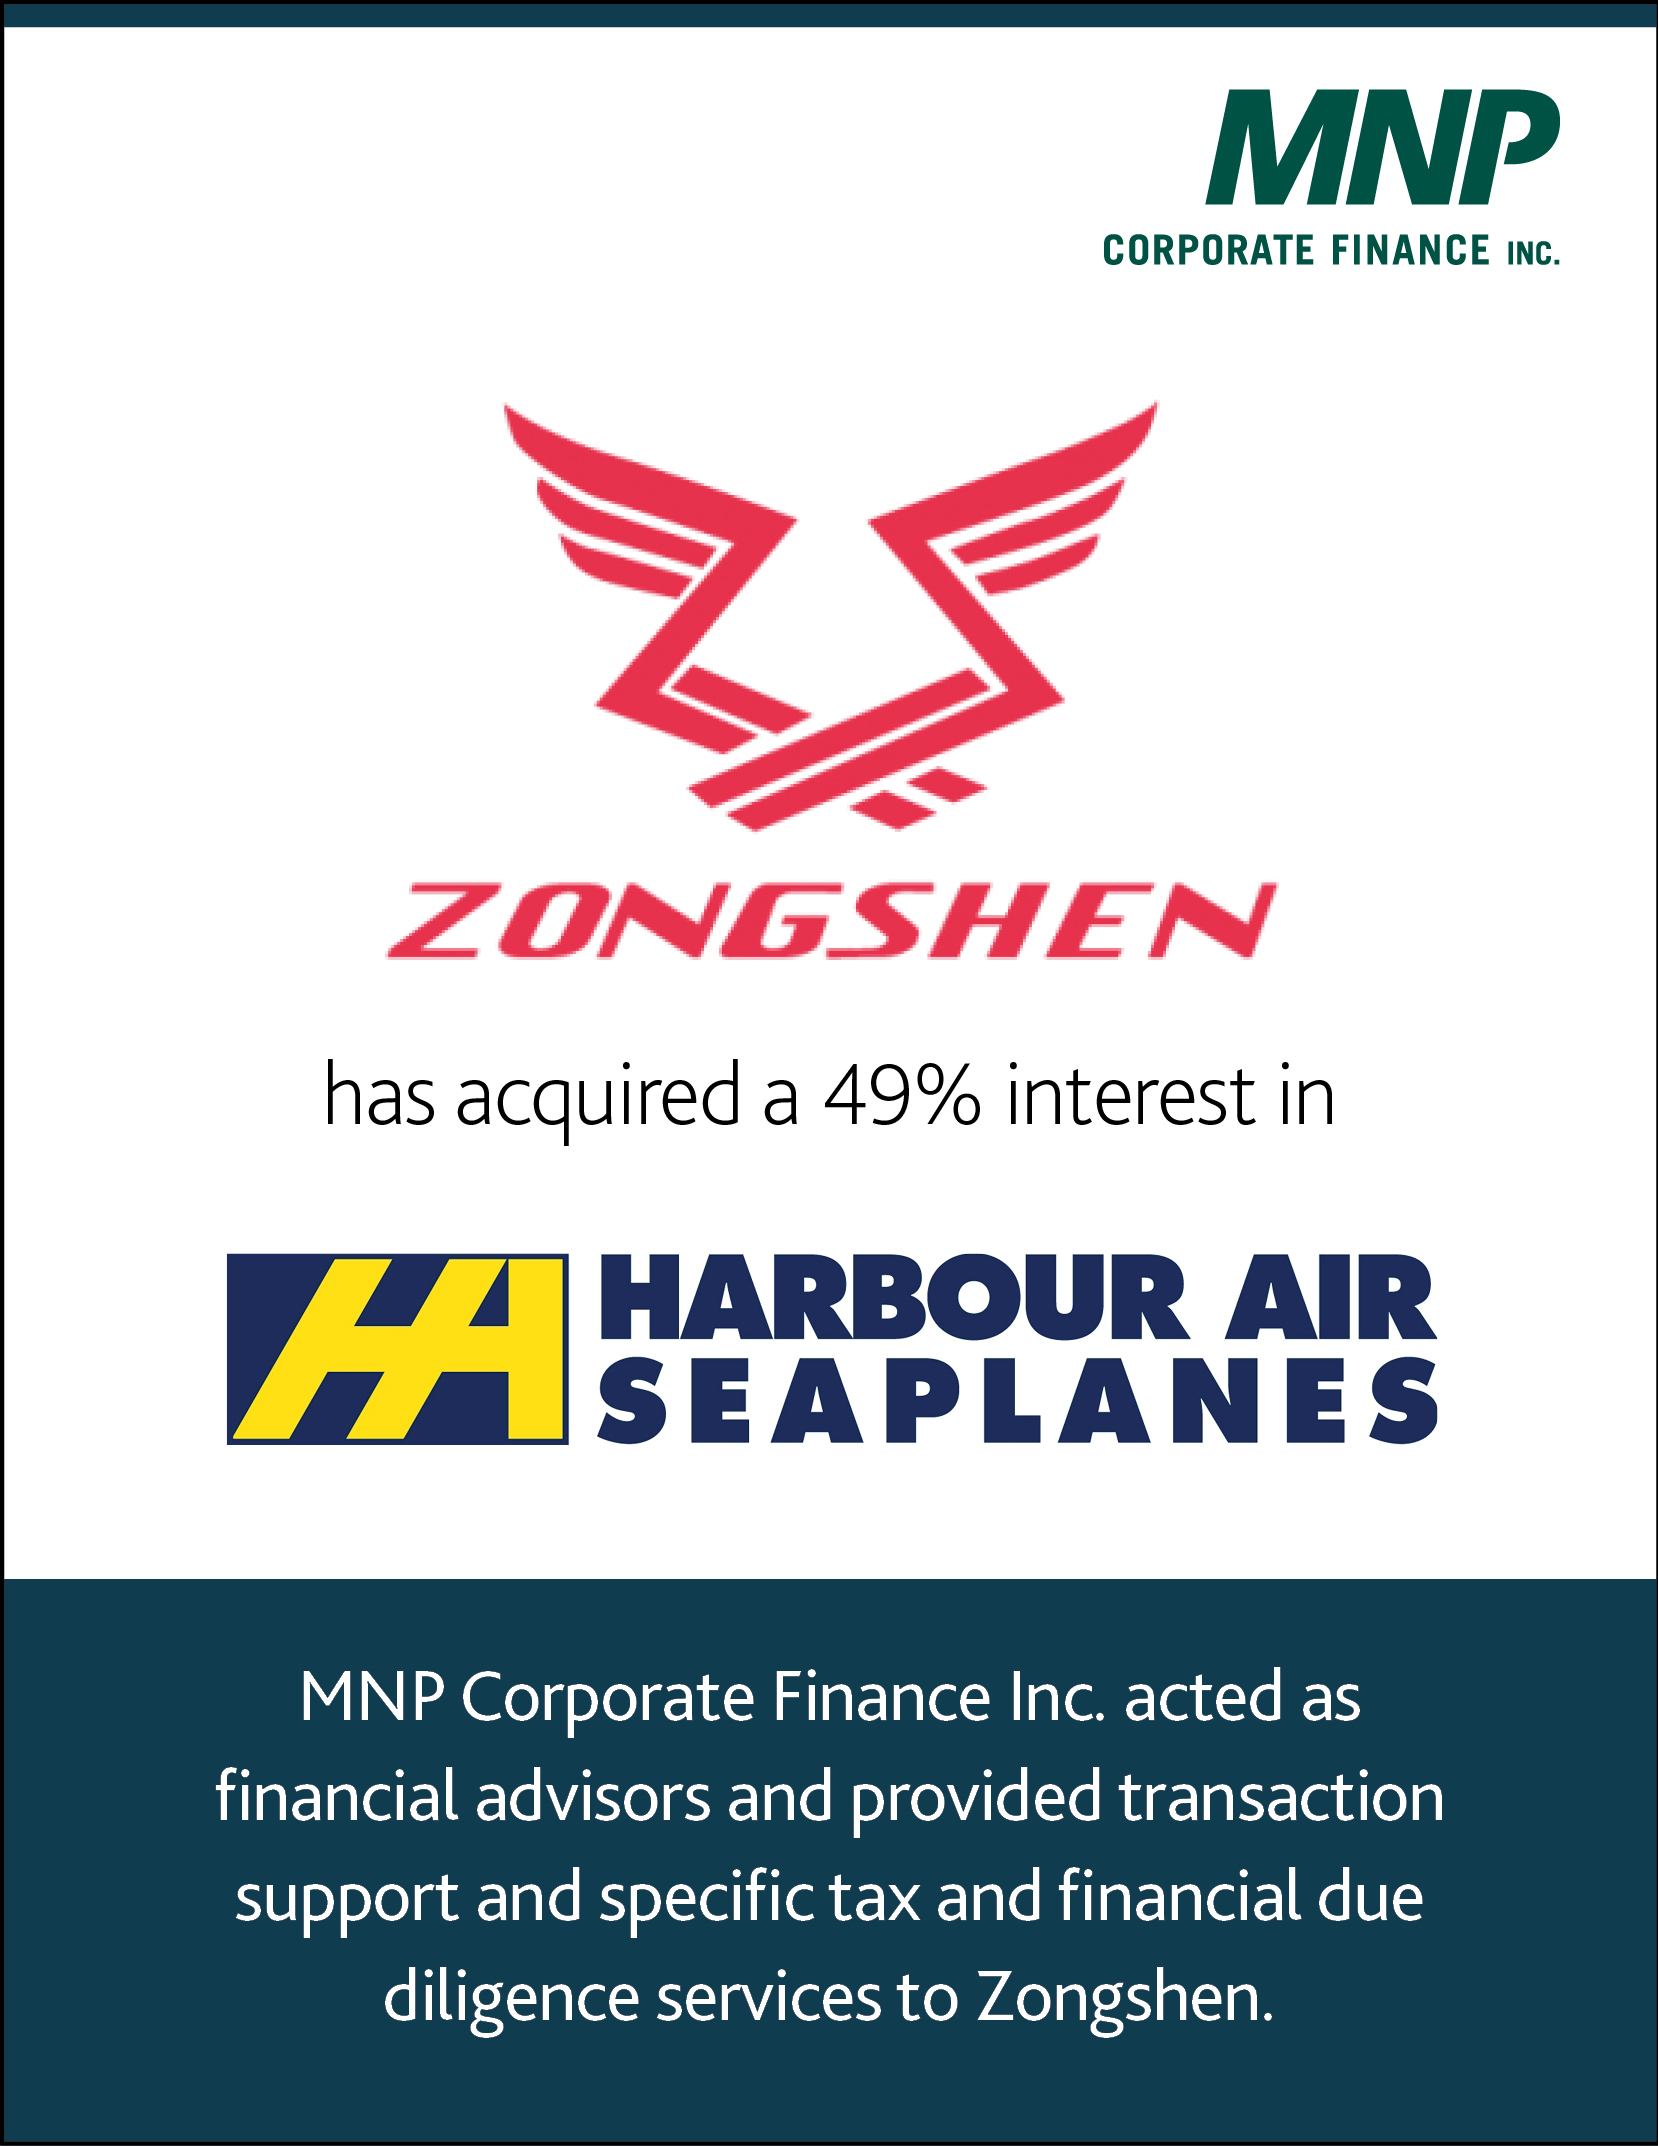 Zongshen has acquired a 49% interest in Harbrour Air Seaplanes